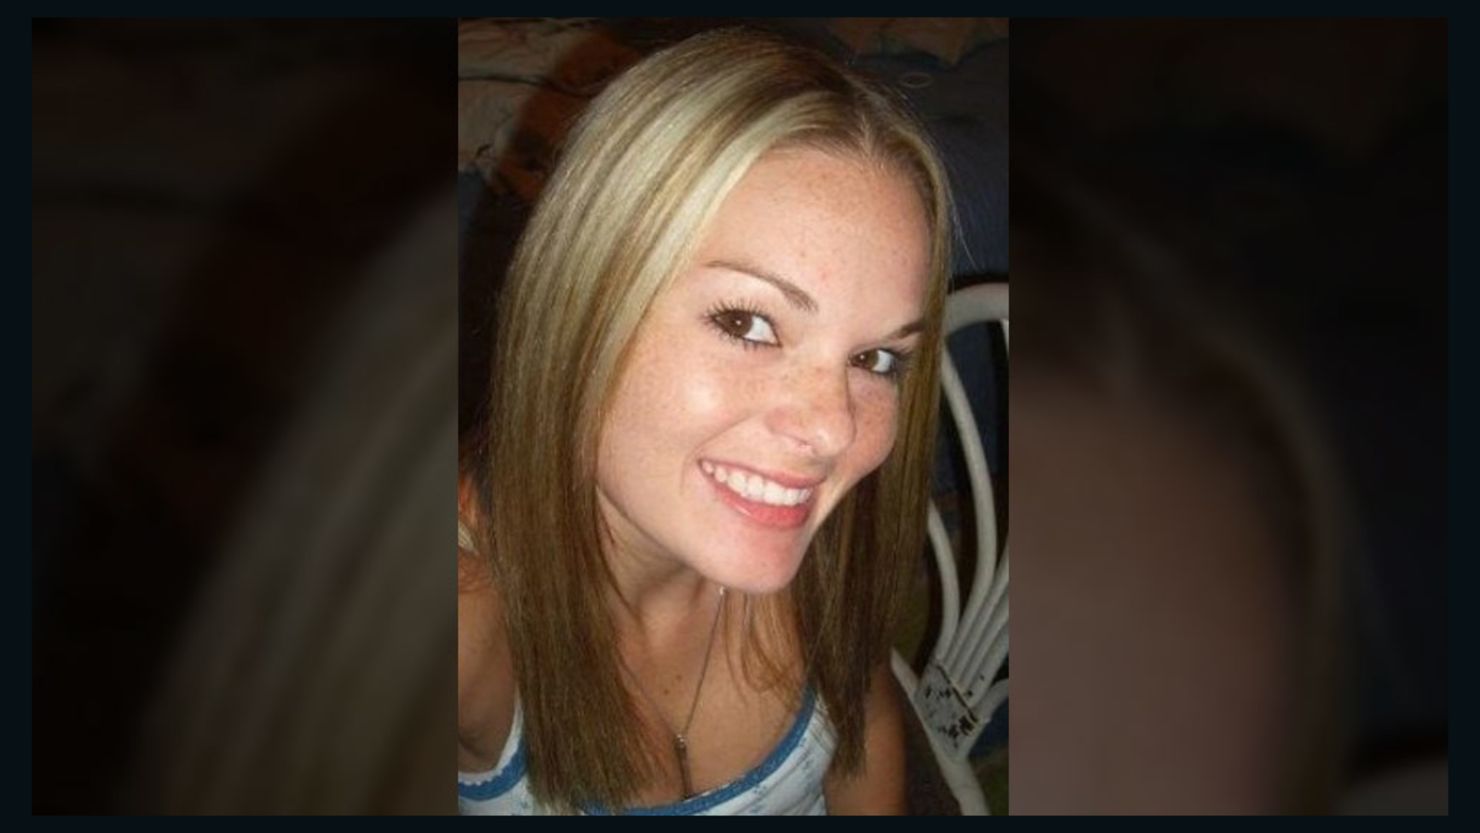 Police believe they may have found the remains of Pfc. Kelli Bordeaux